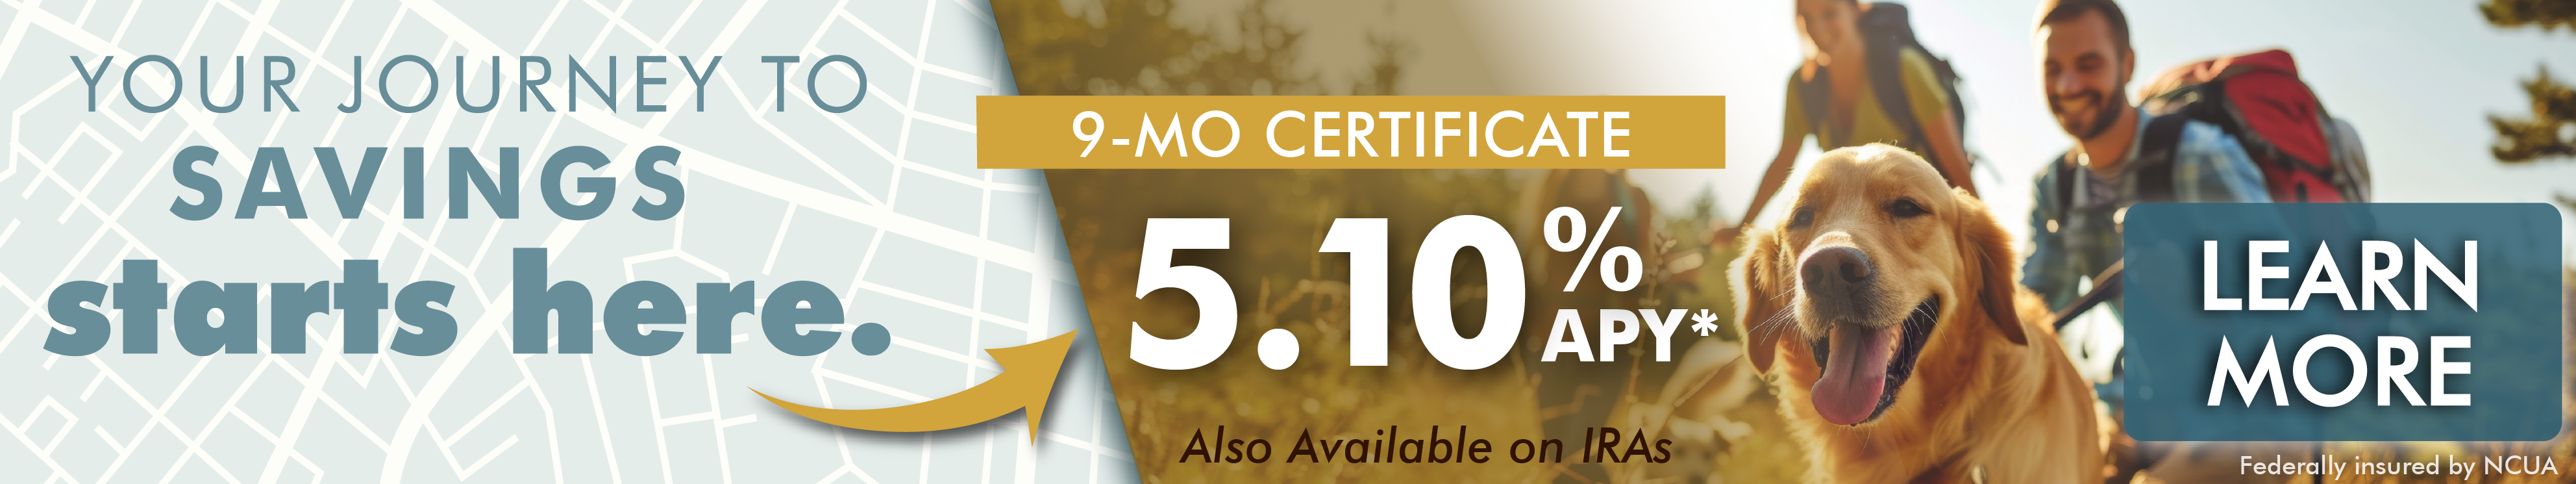 Your Journey to Savings Starts Here! 9-mo Certificate 5.10% APY